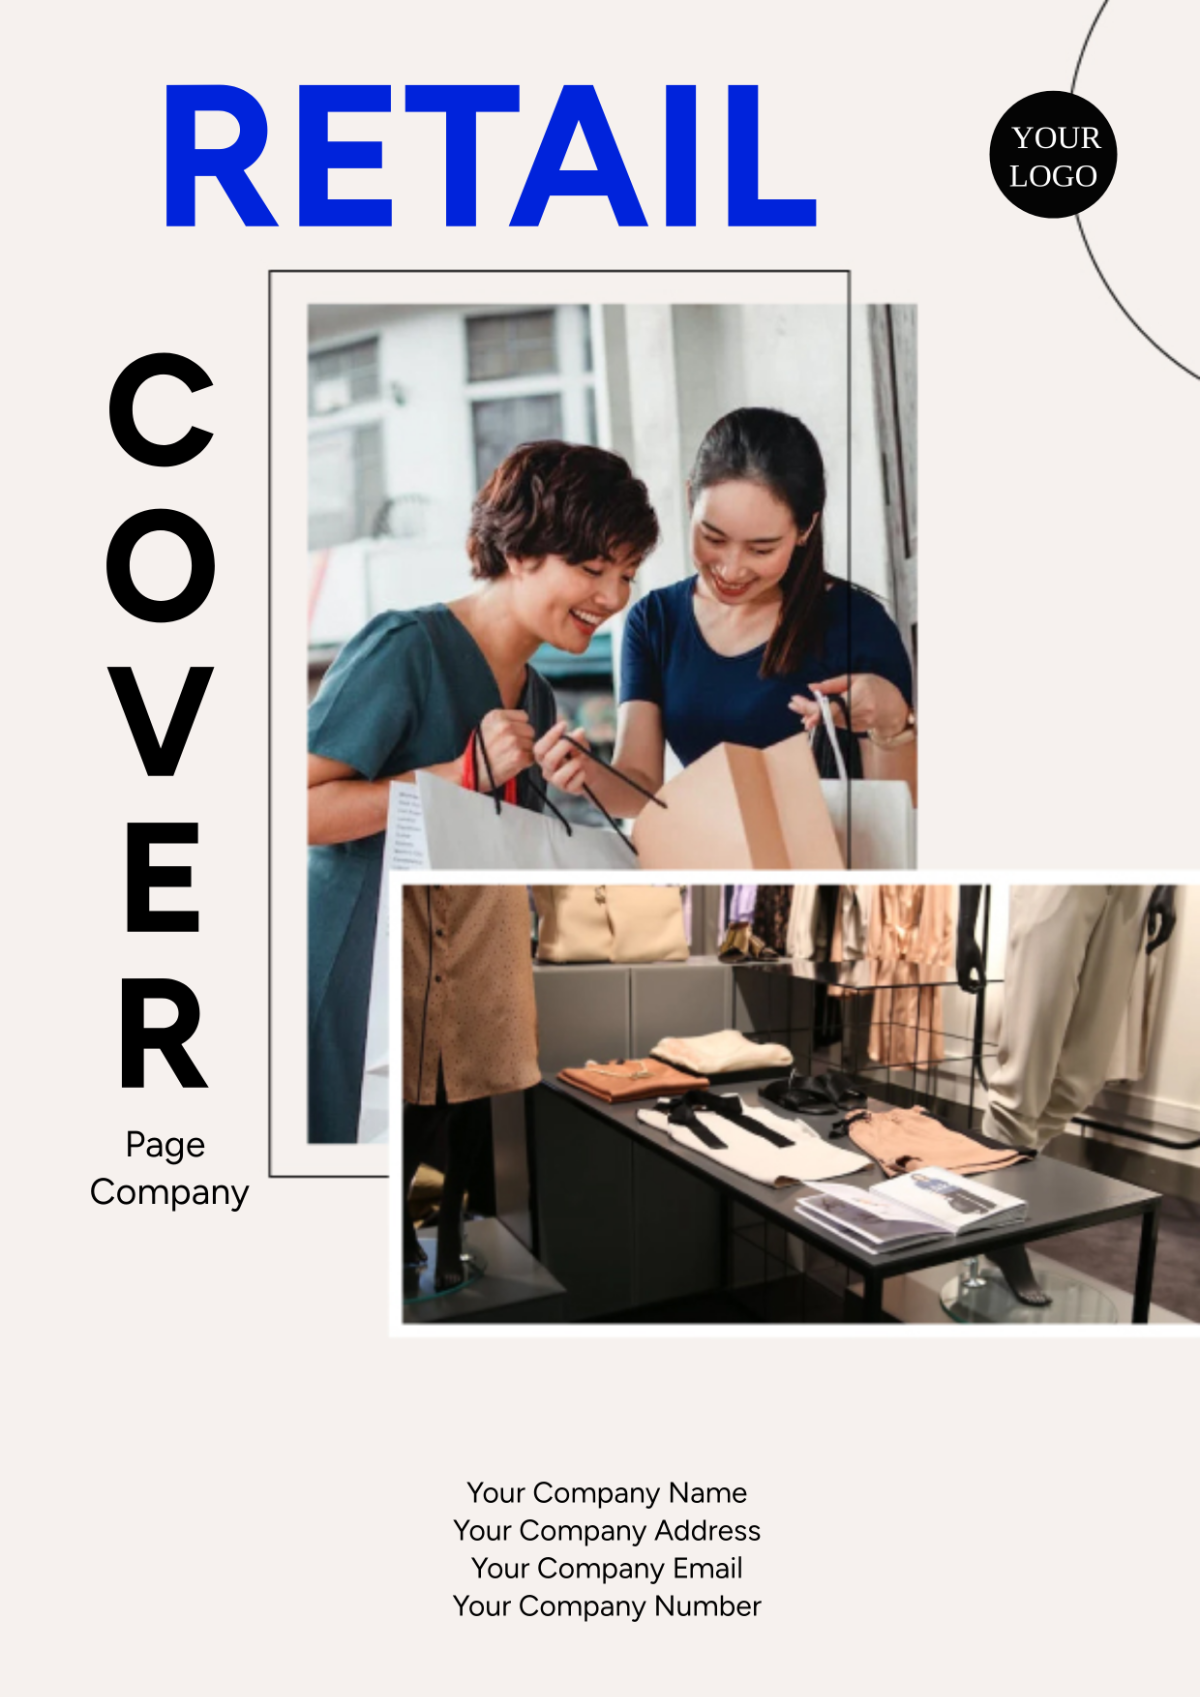 Retail Cover Page Company